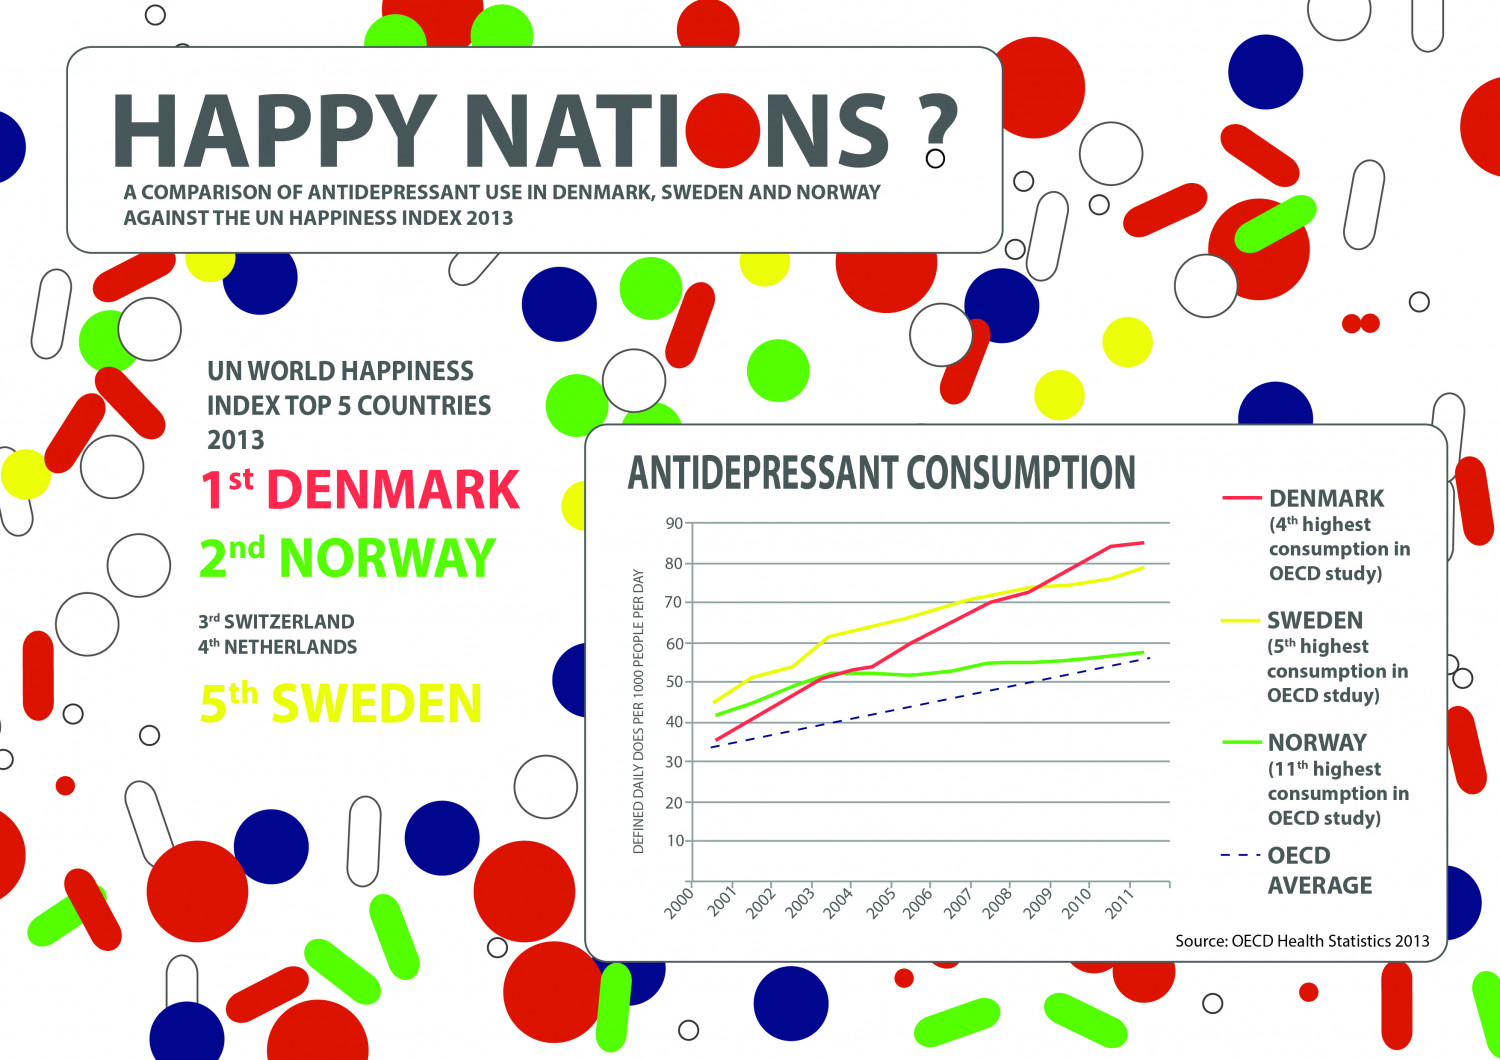 Happy Nations? Antidepressant use in the top rated countries in the 'Happiness Index' Infographic